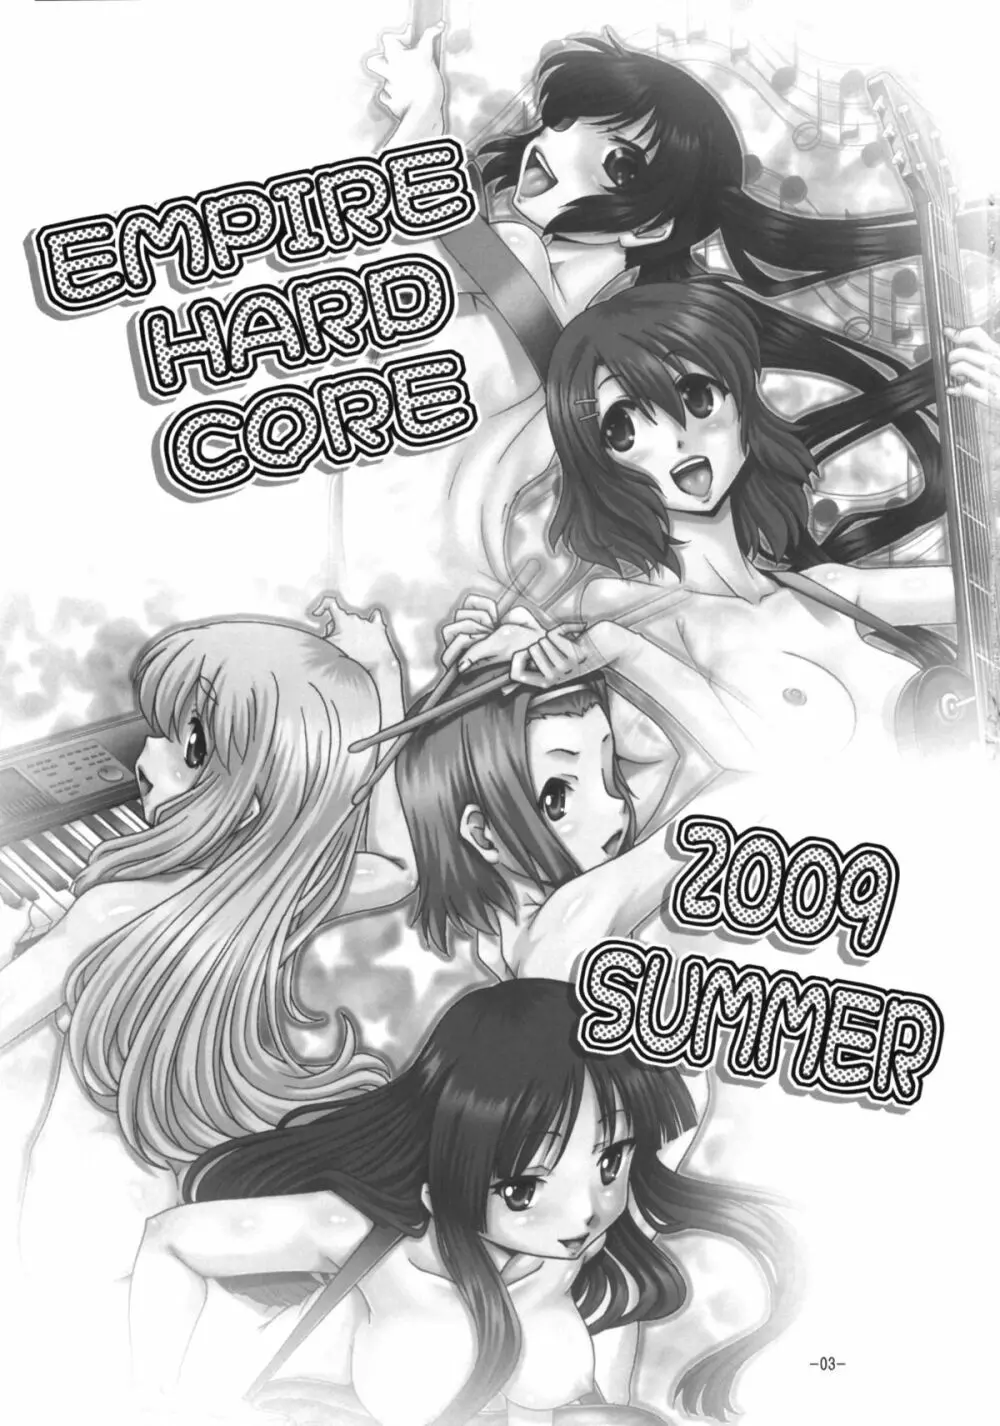 EMPIRE HARD CORE 2009 SUMMER Page.2